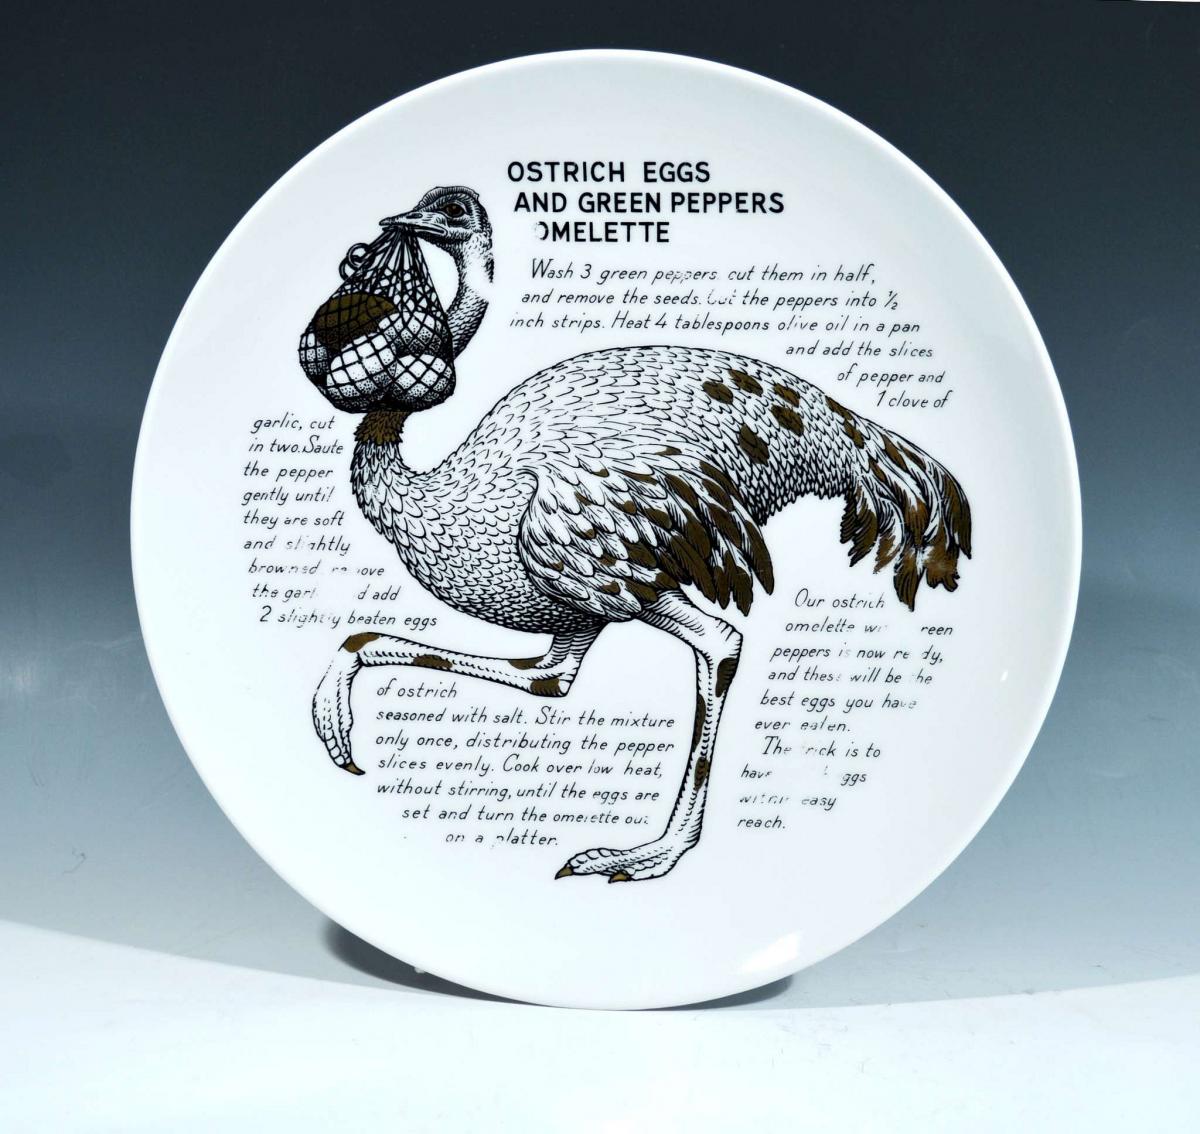 Piero Fornasetti Fleming Joffe Porcelain Recipe Plate, Ostrich Eggs And Green Peppers Omelette, 1960s